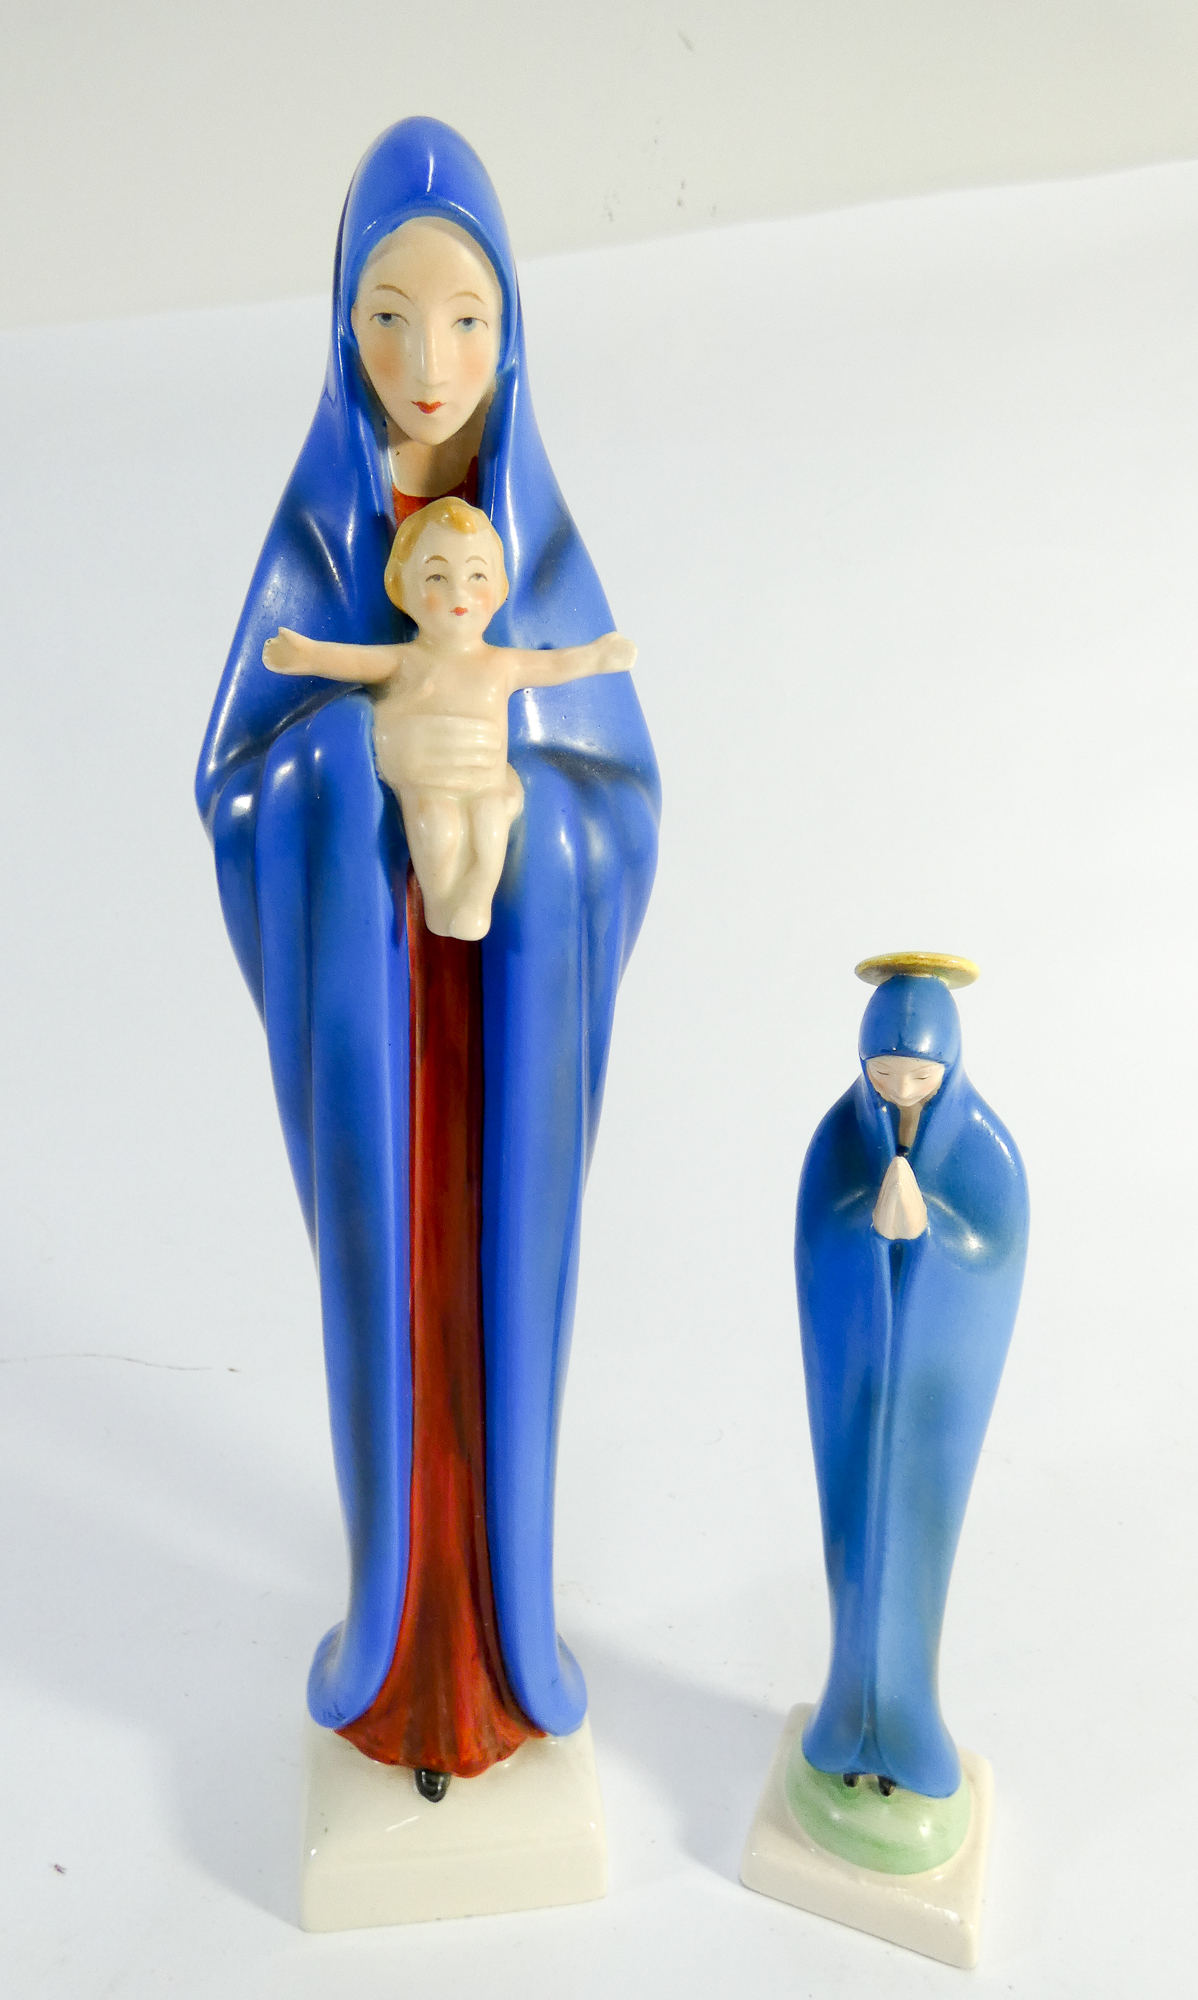 Model of the Virgin Mary with infant Christ and another of Mary with halo,